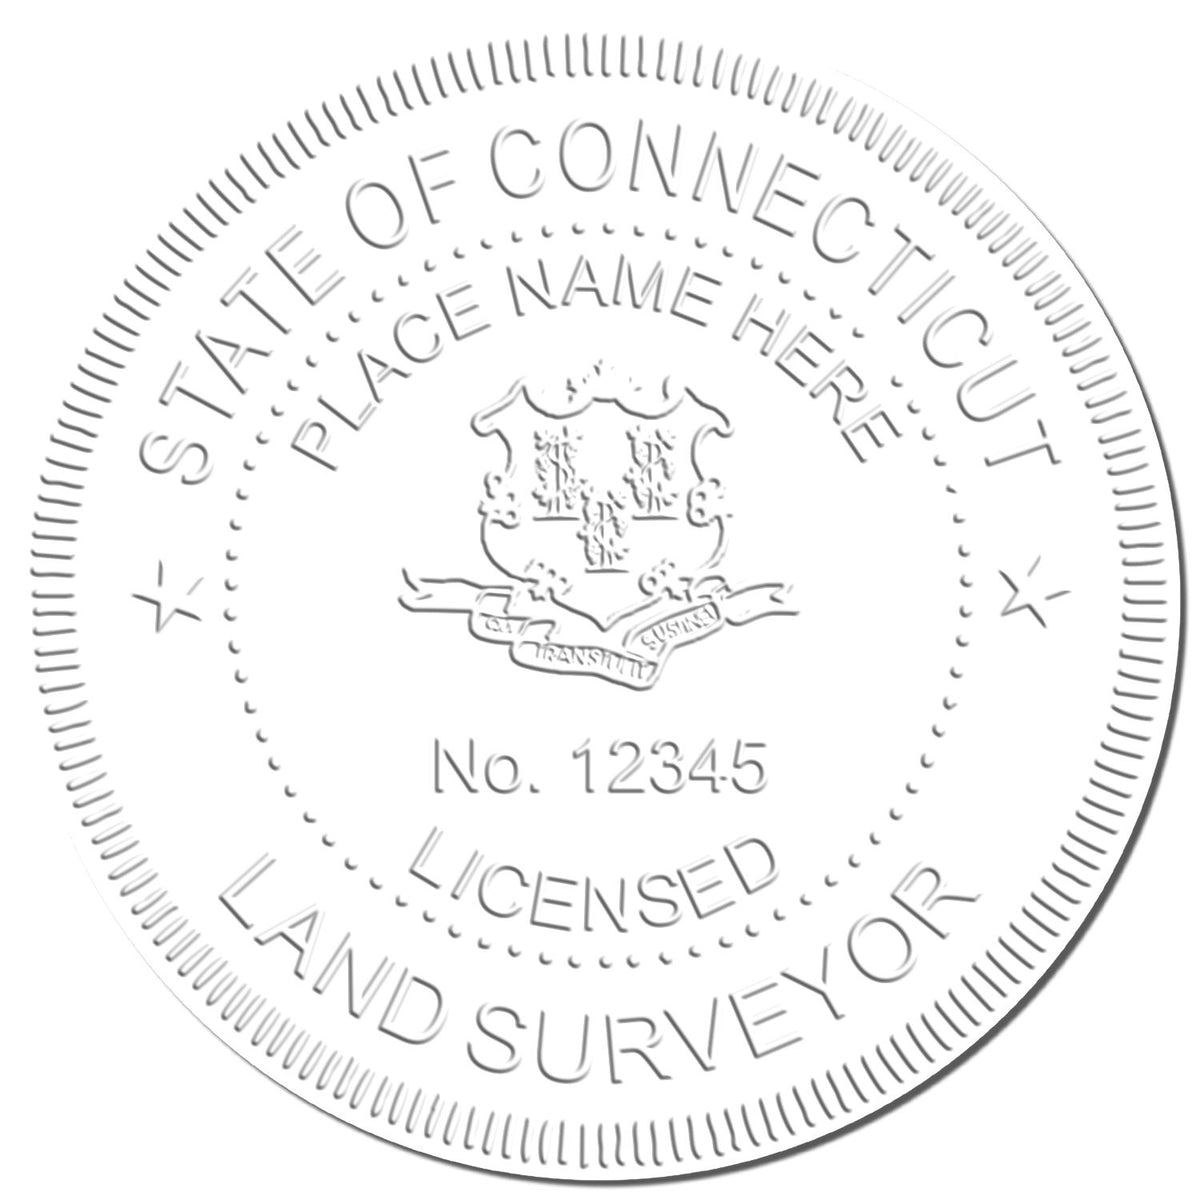 This paper is stamped with a sample imprint of the Connecticut Desk Surveyor Seal Embosser, signifying its quality and reliability.